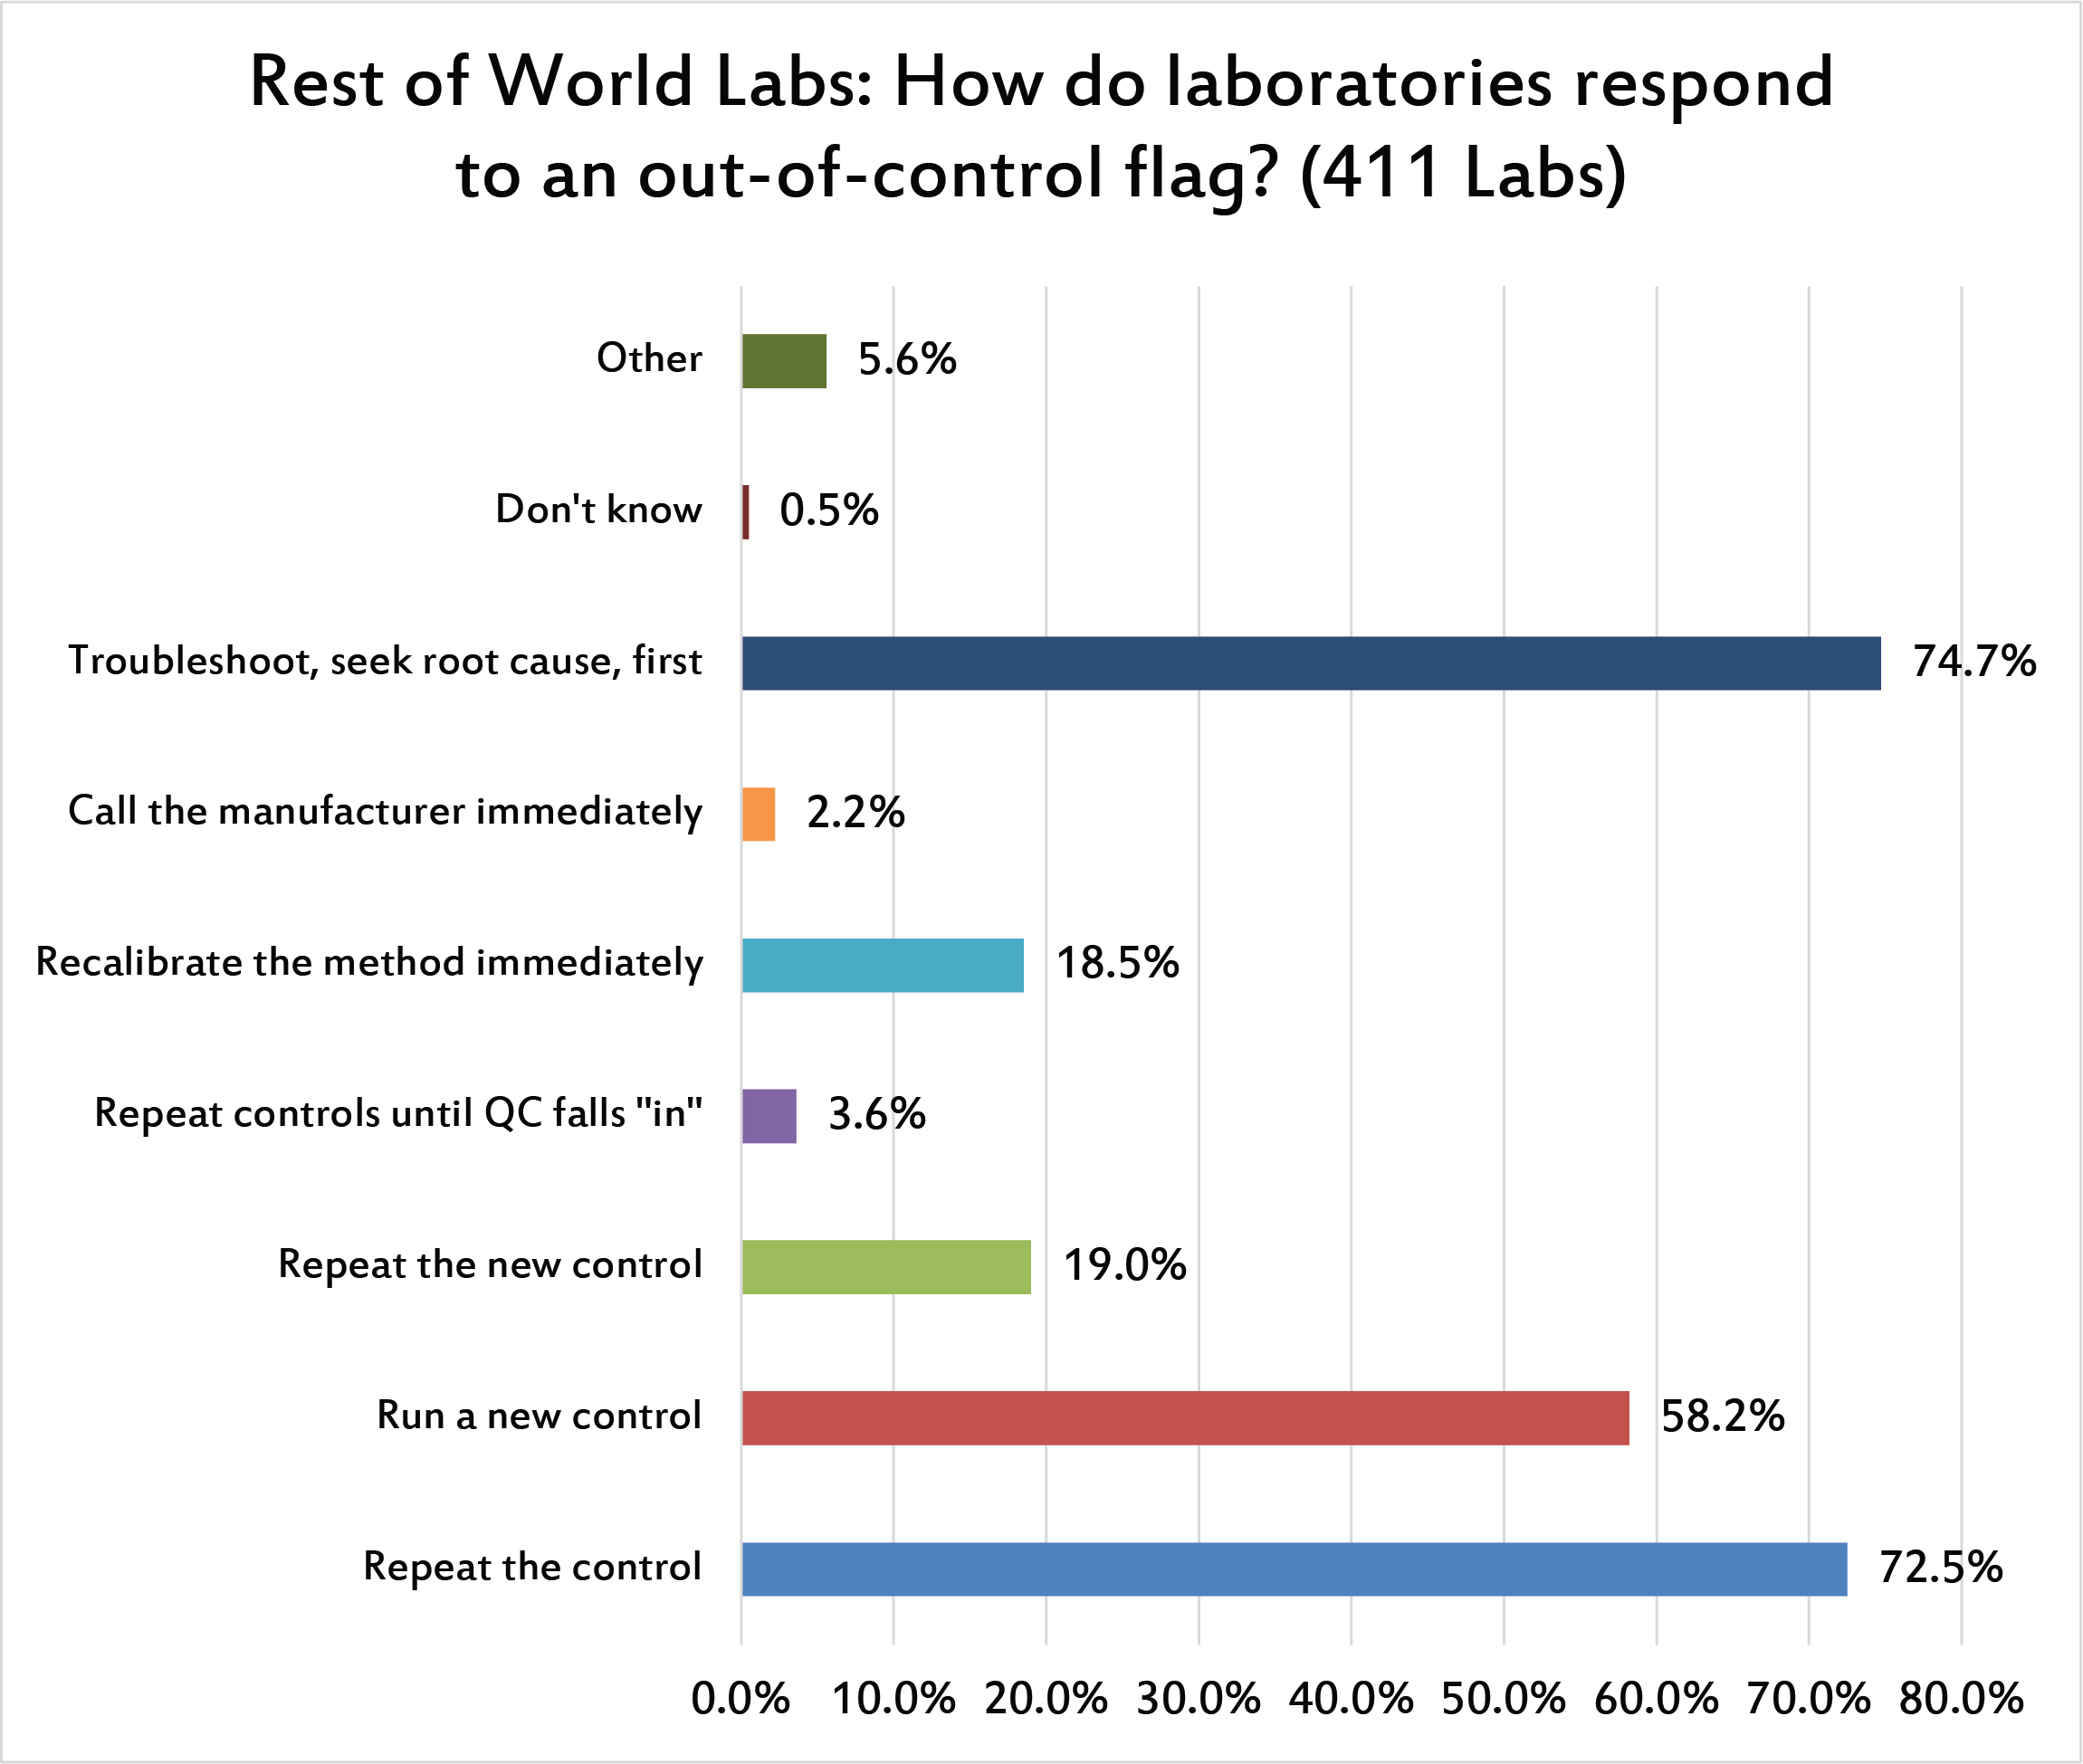 2017 Global QC Survey rest of world: how do labs respond to out-of-control flags?